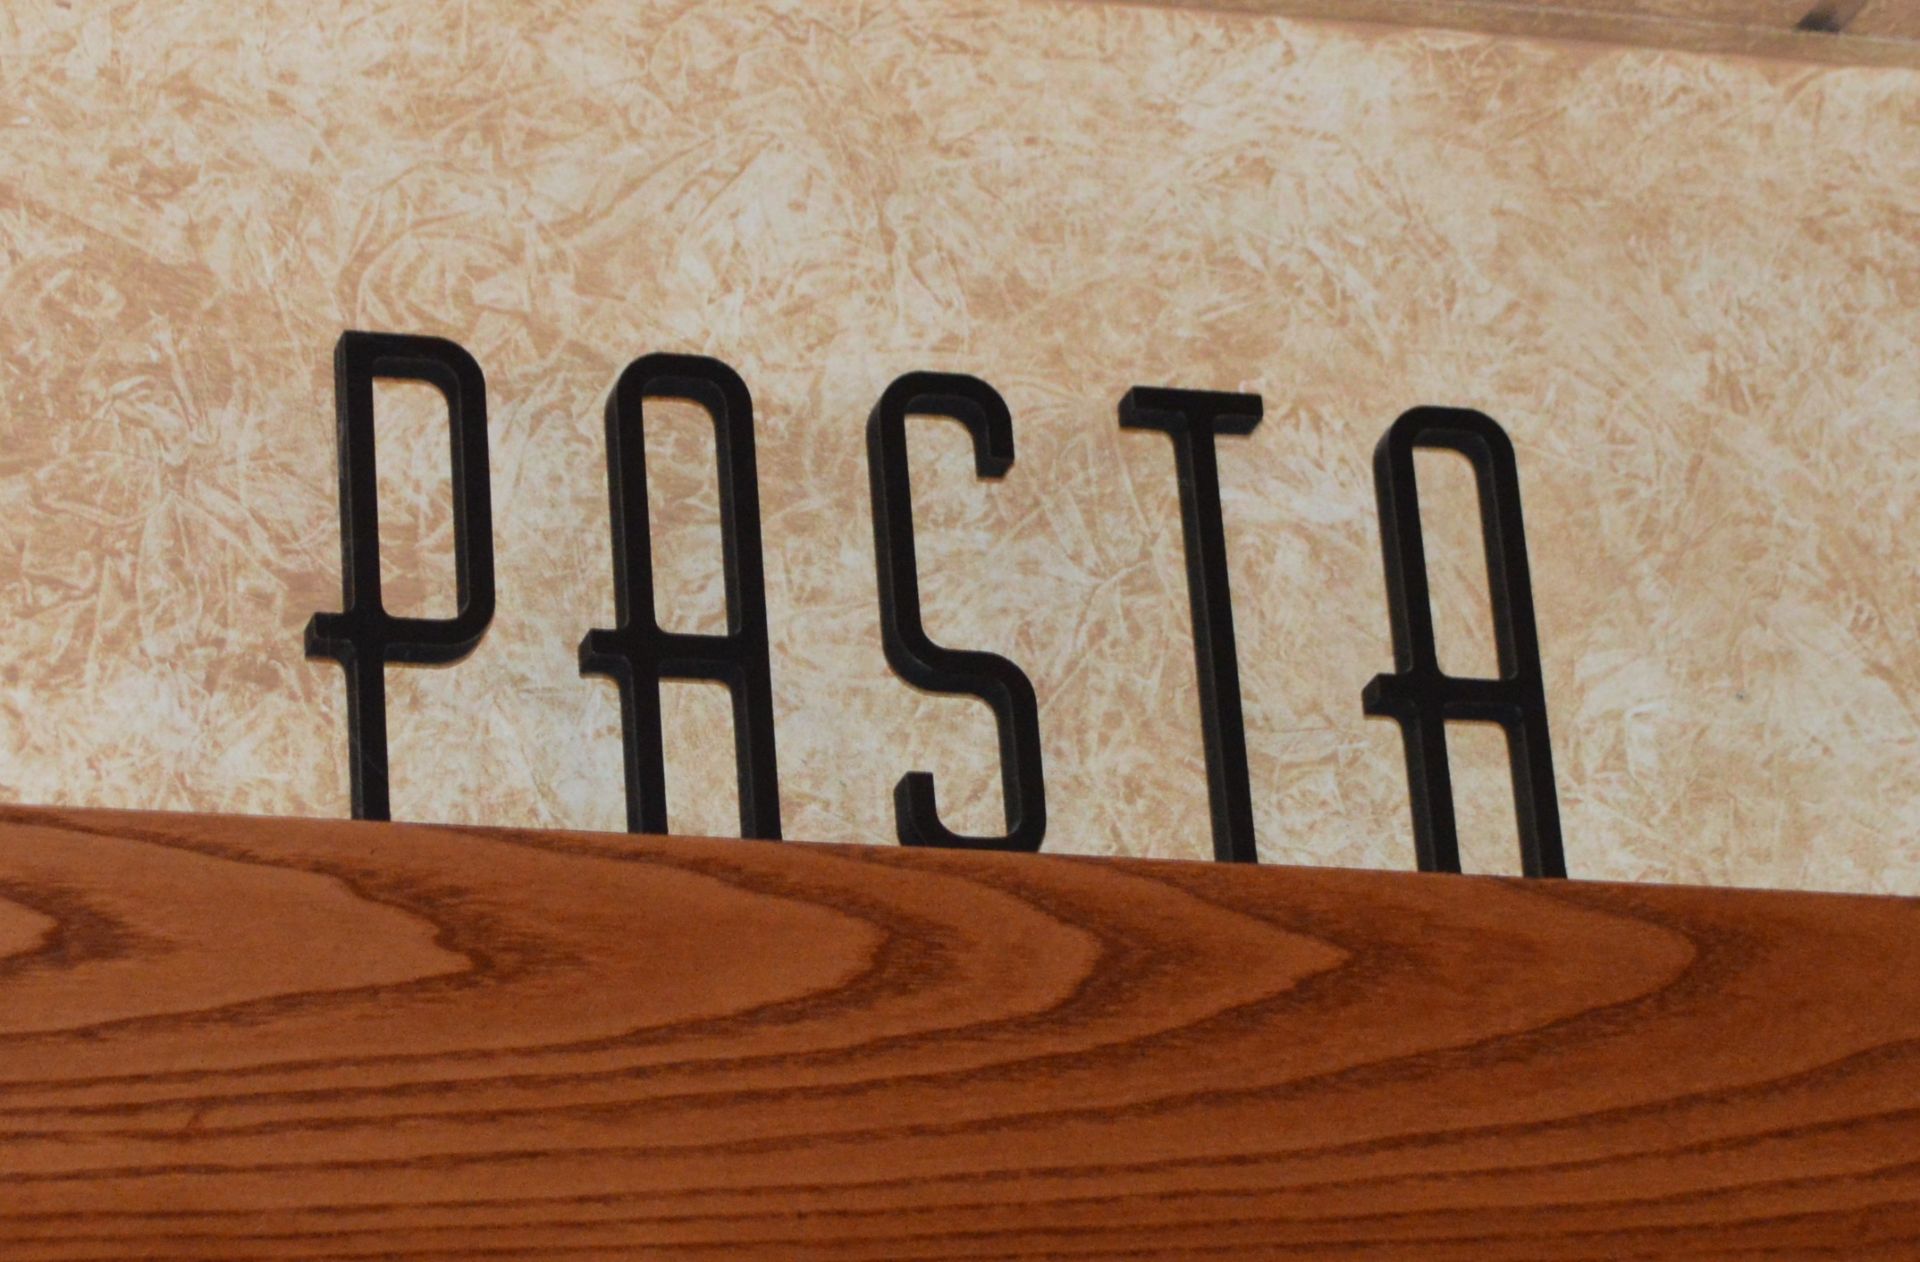 7 x Wooden Signs Suitable For Restaurants, Cafes, Bistros etc - Includes Calzone, Pizza, - Image 7 of 9